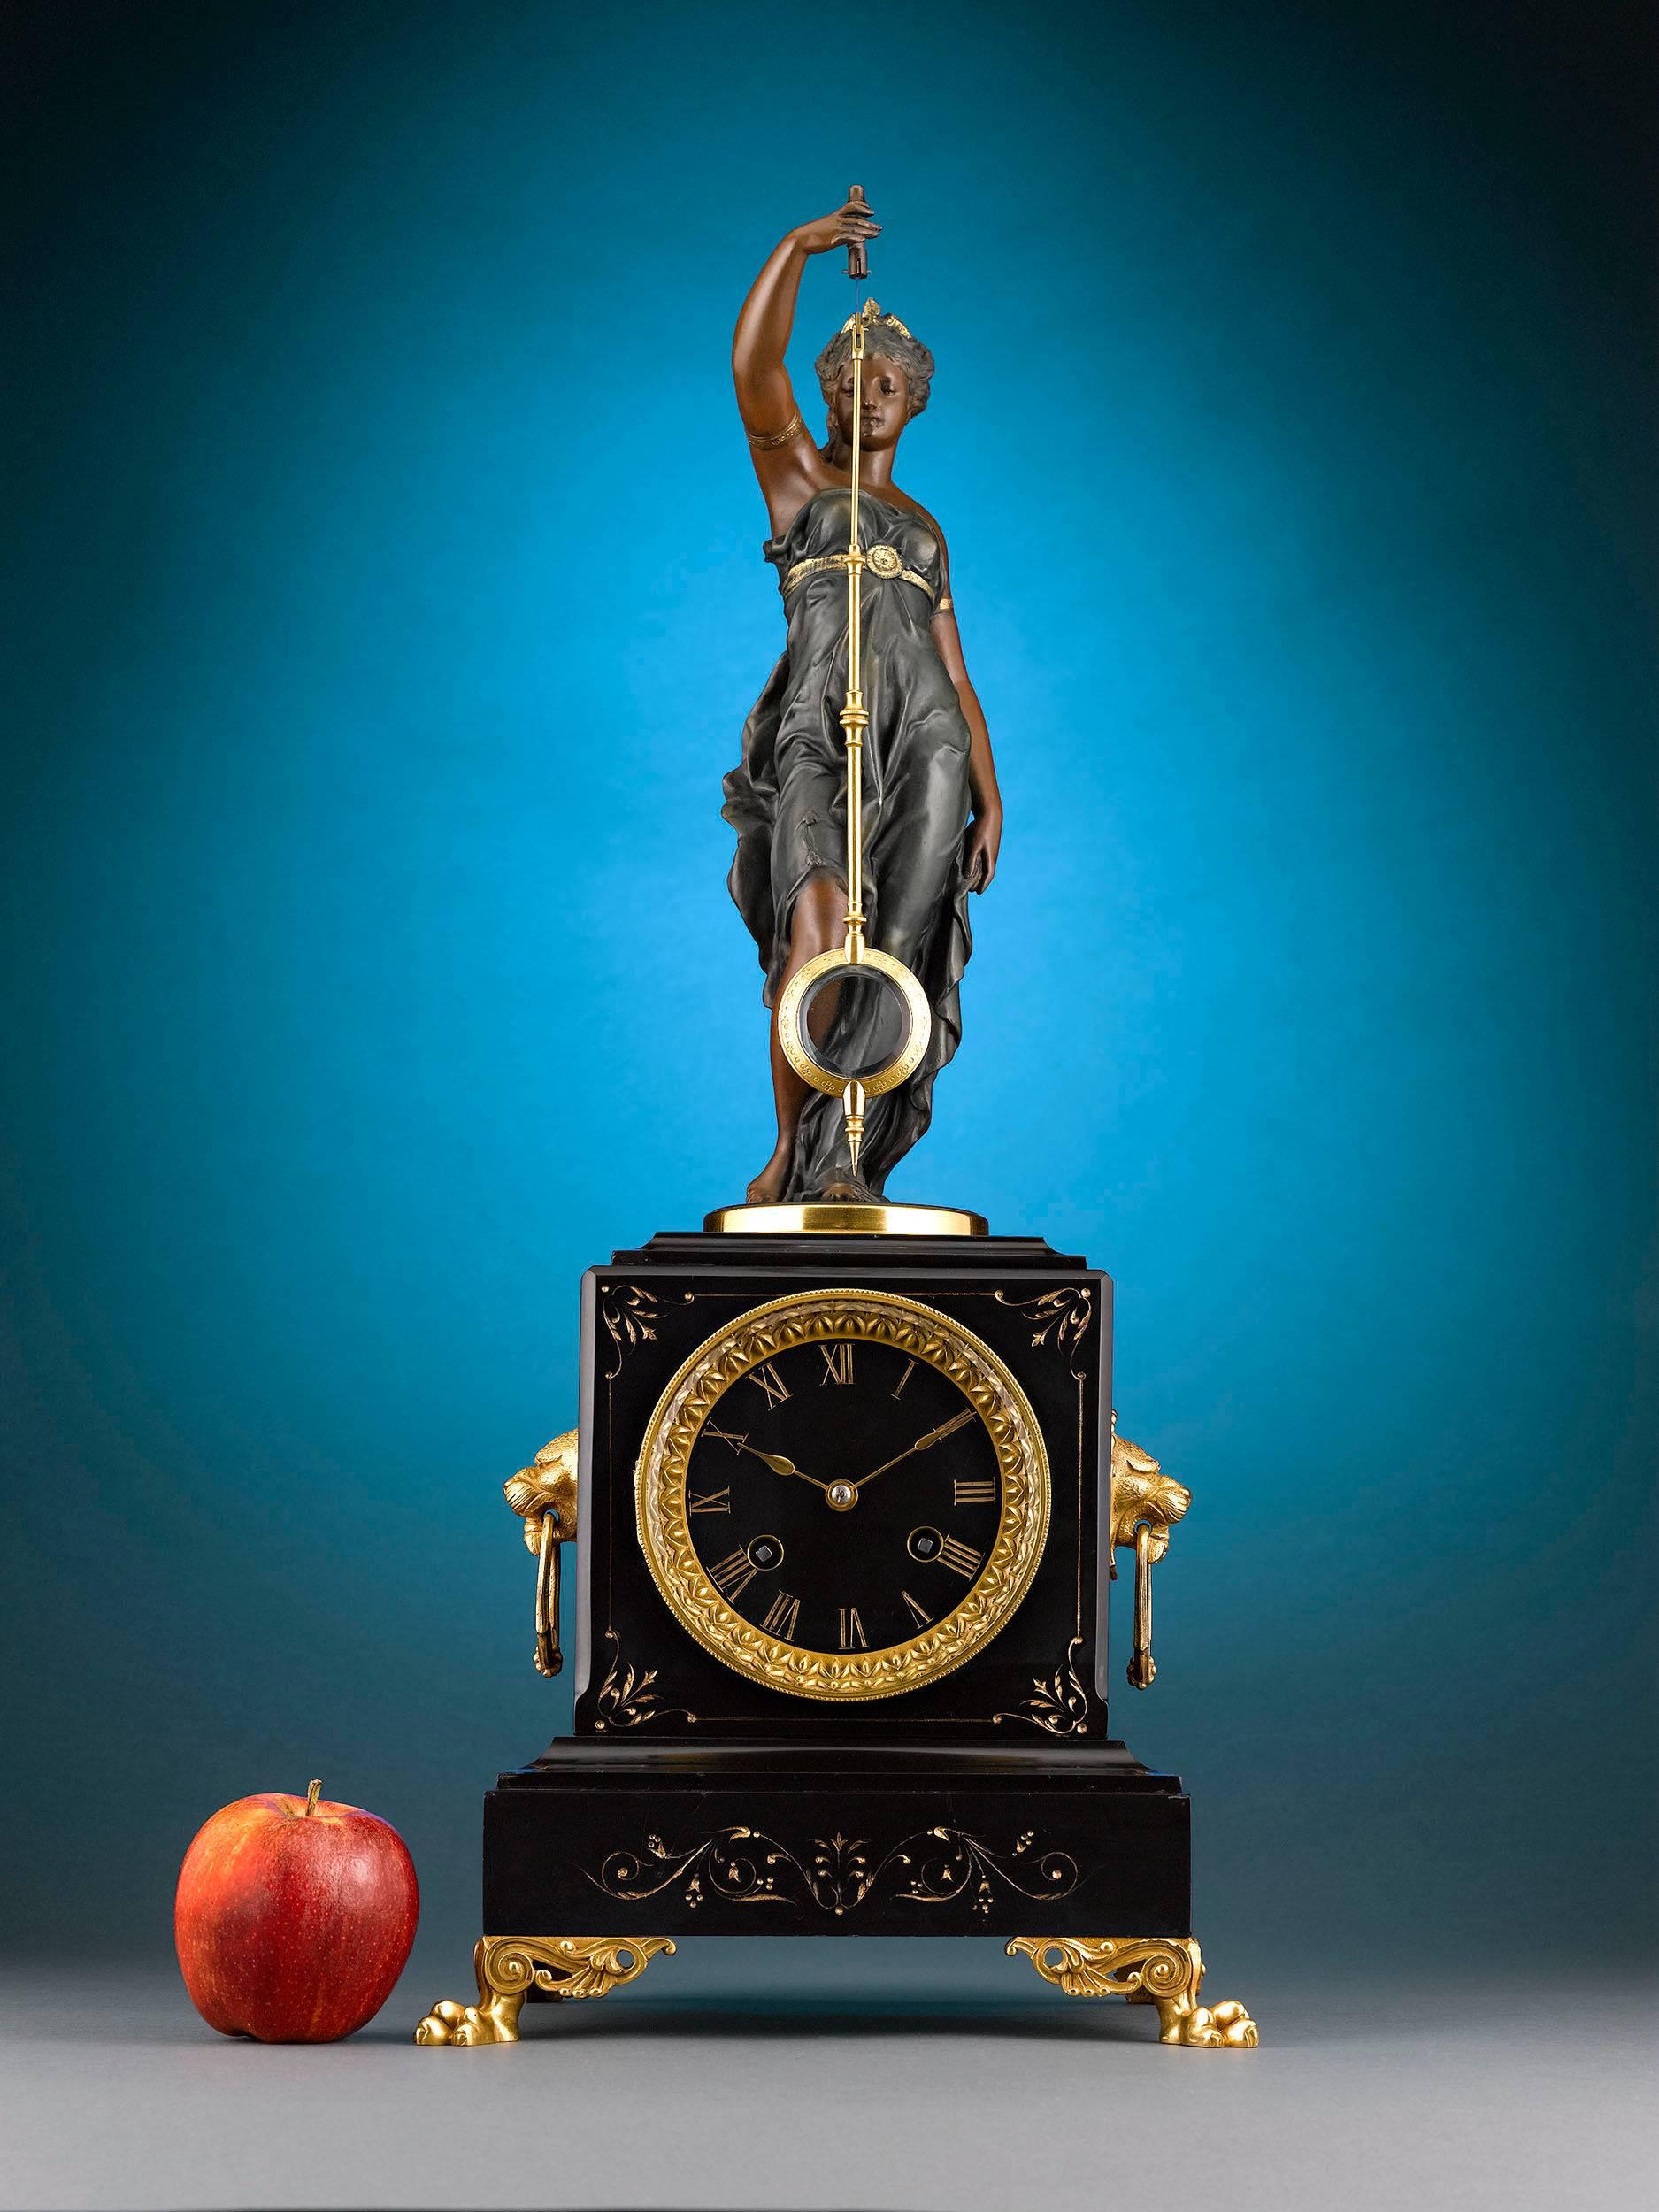 This stunning French mystery clock by A.R. Guilmet is a delight to behold, combining captivating artistry with mechanical genius. The patented bronze figure stands upon a black slate base, holding the pendulum above the intricate spring-driven